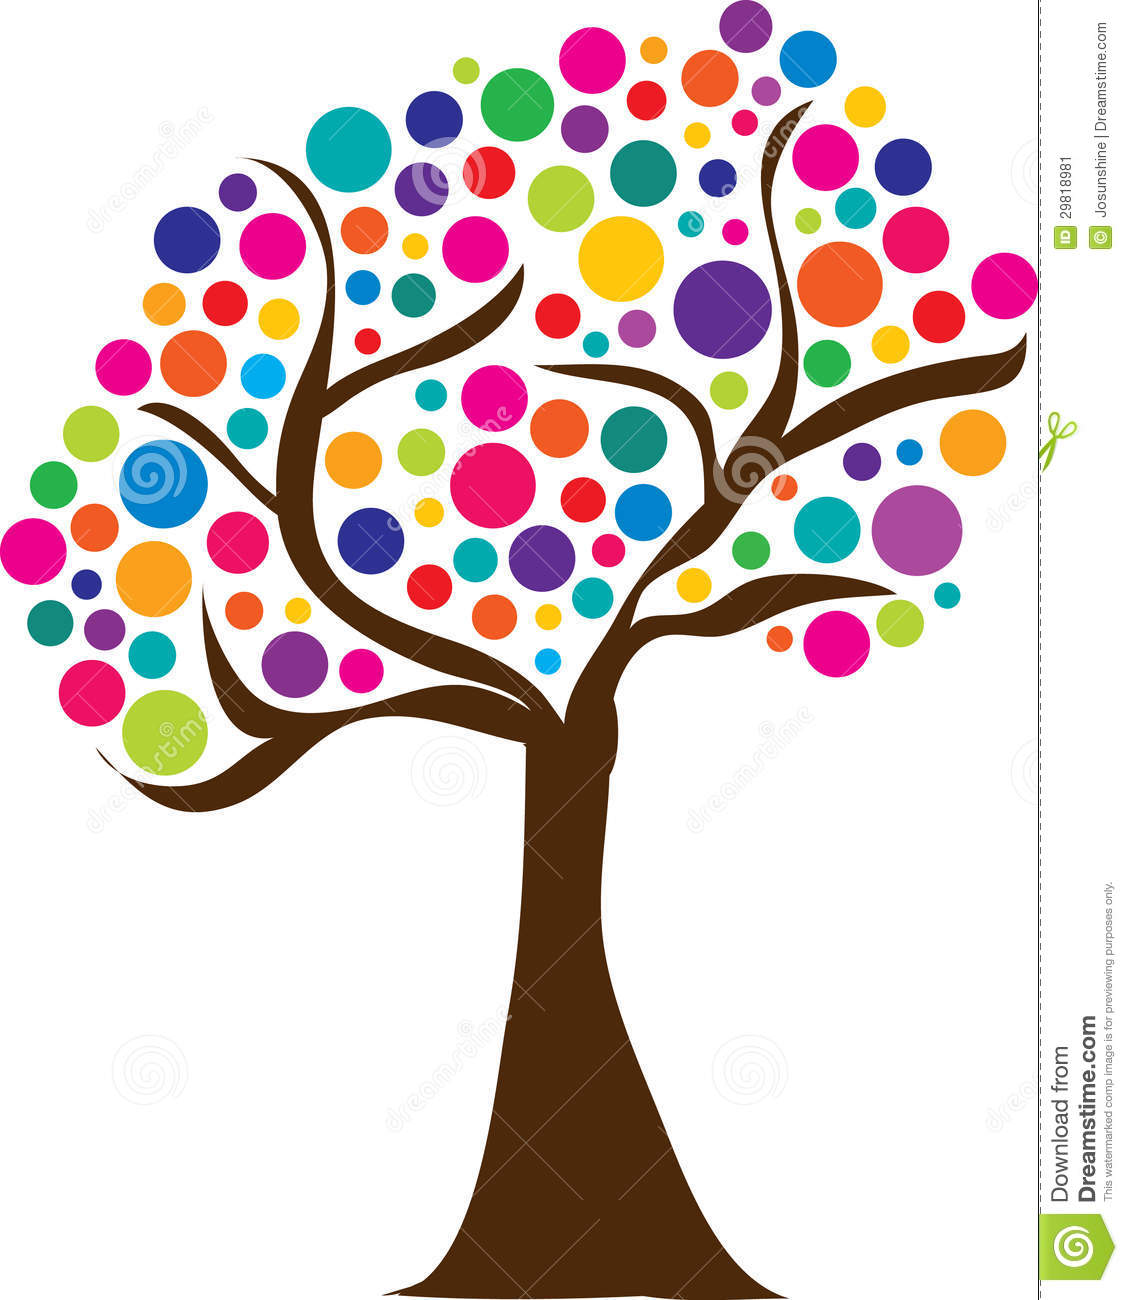 Colorful tree clipart.